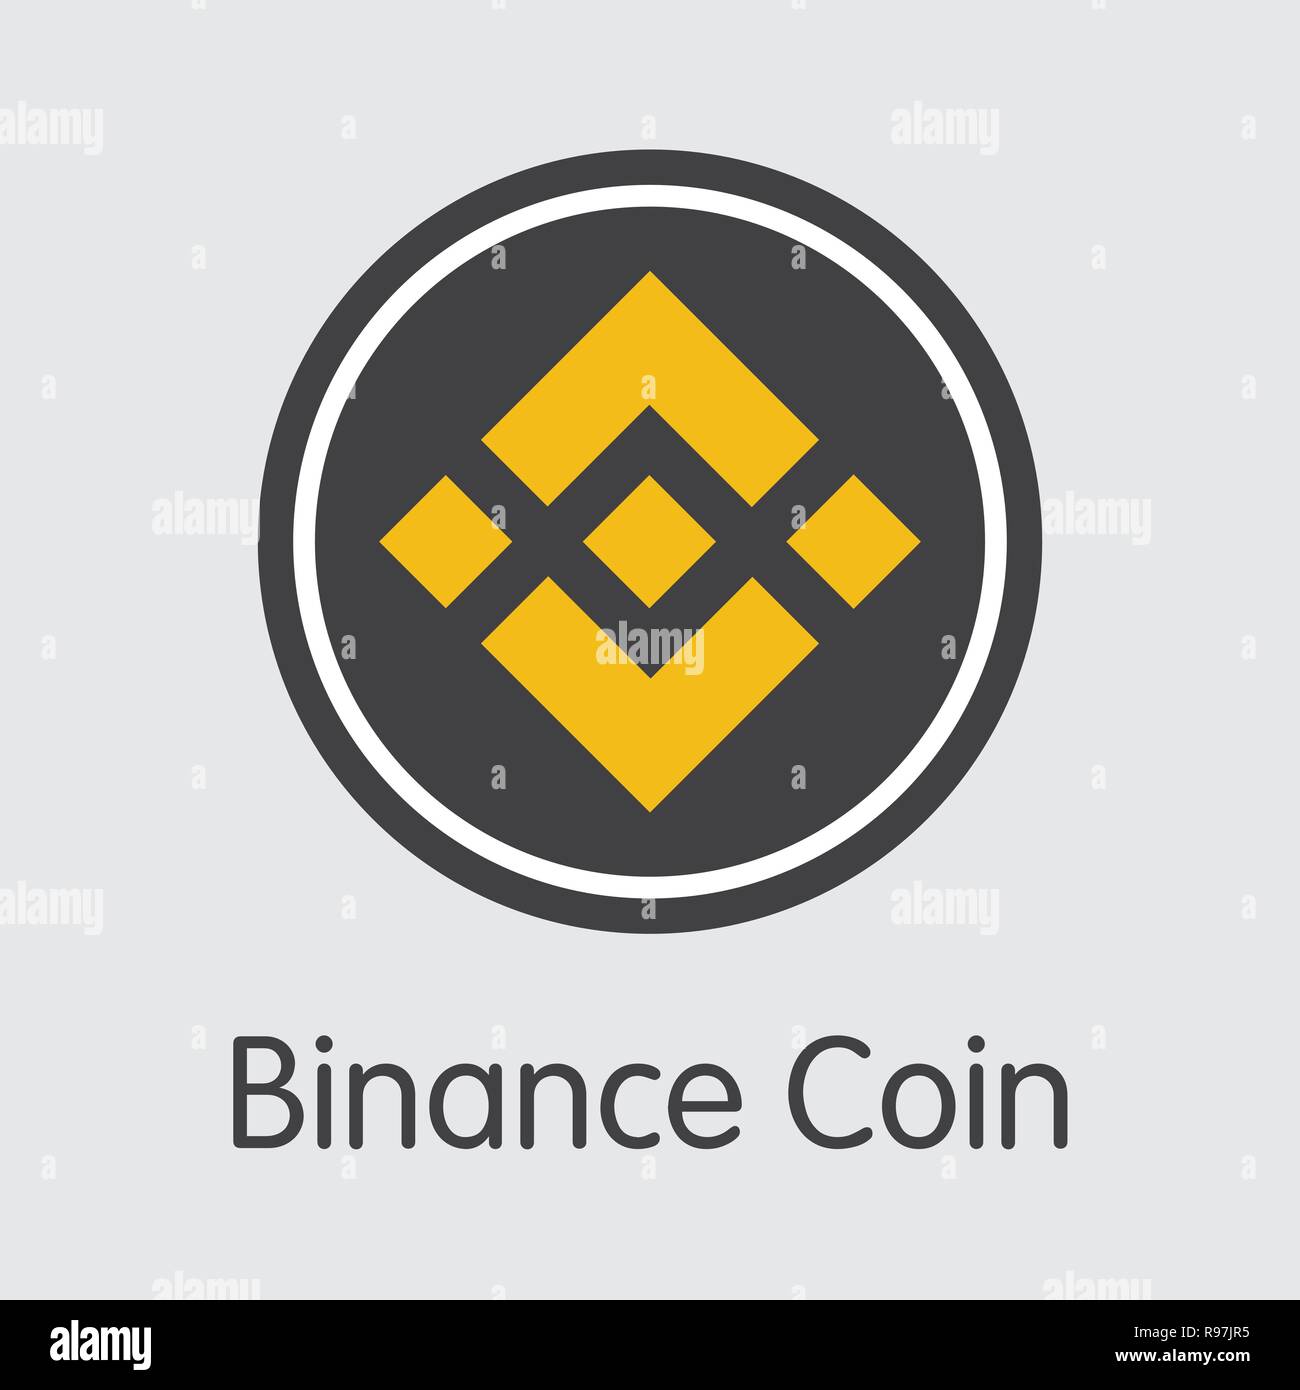 BSV - Binance. The Crypto Coins or Cryptocurrency Logo. Stock Vector